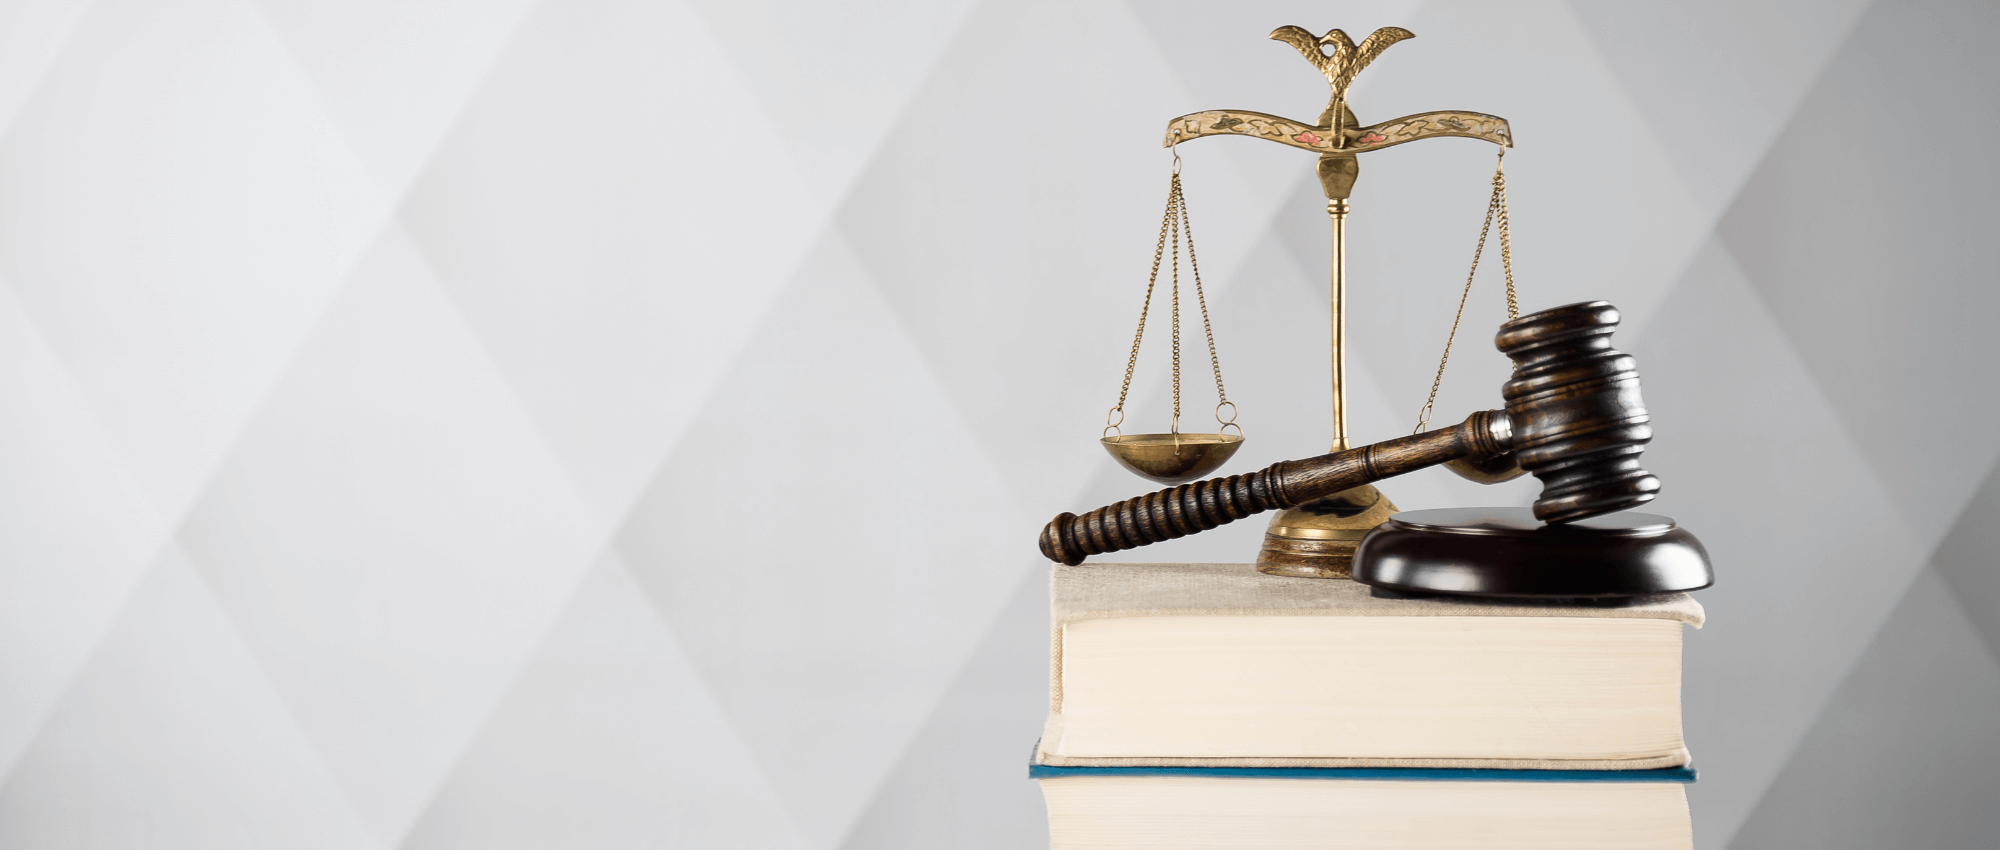 justice scales and gavel on books